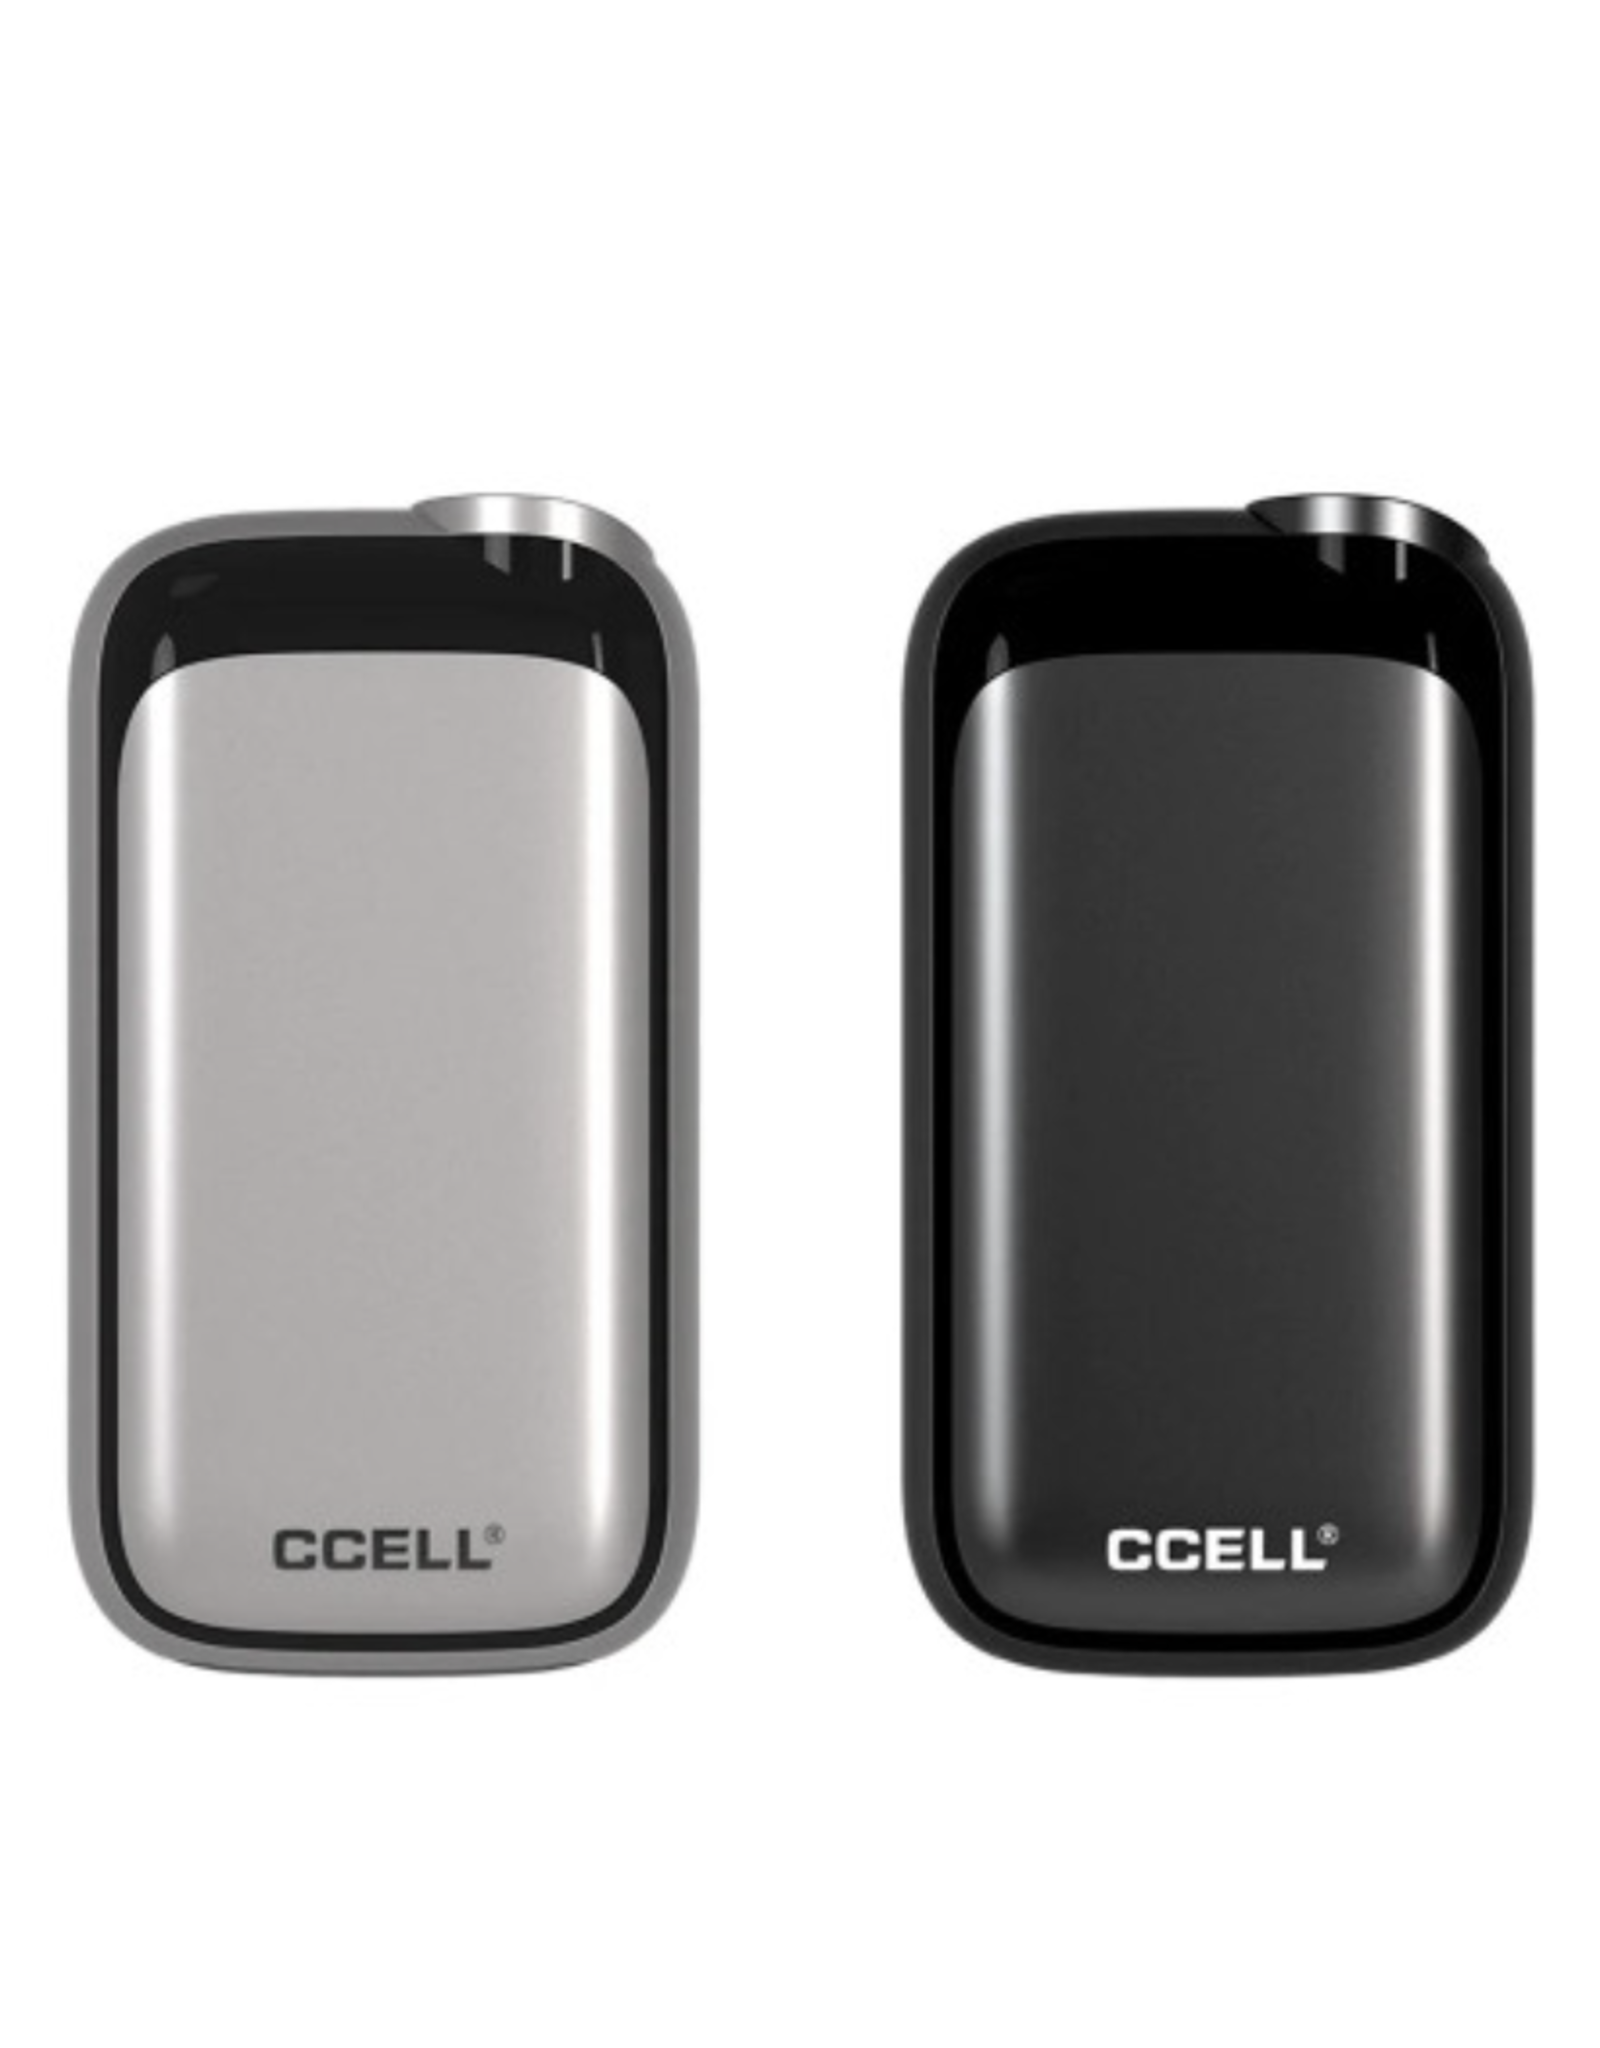 CCell Ccell Rizo Cartridge Vaporizer